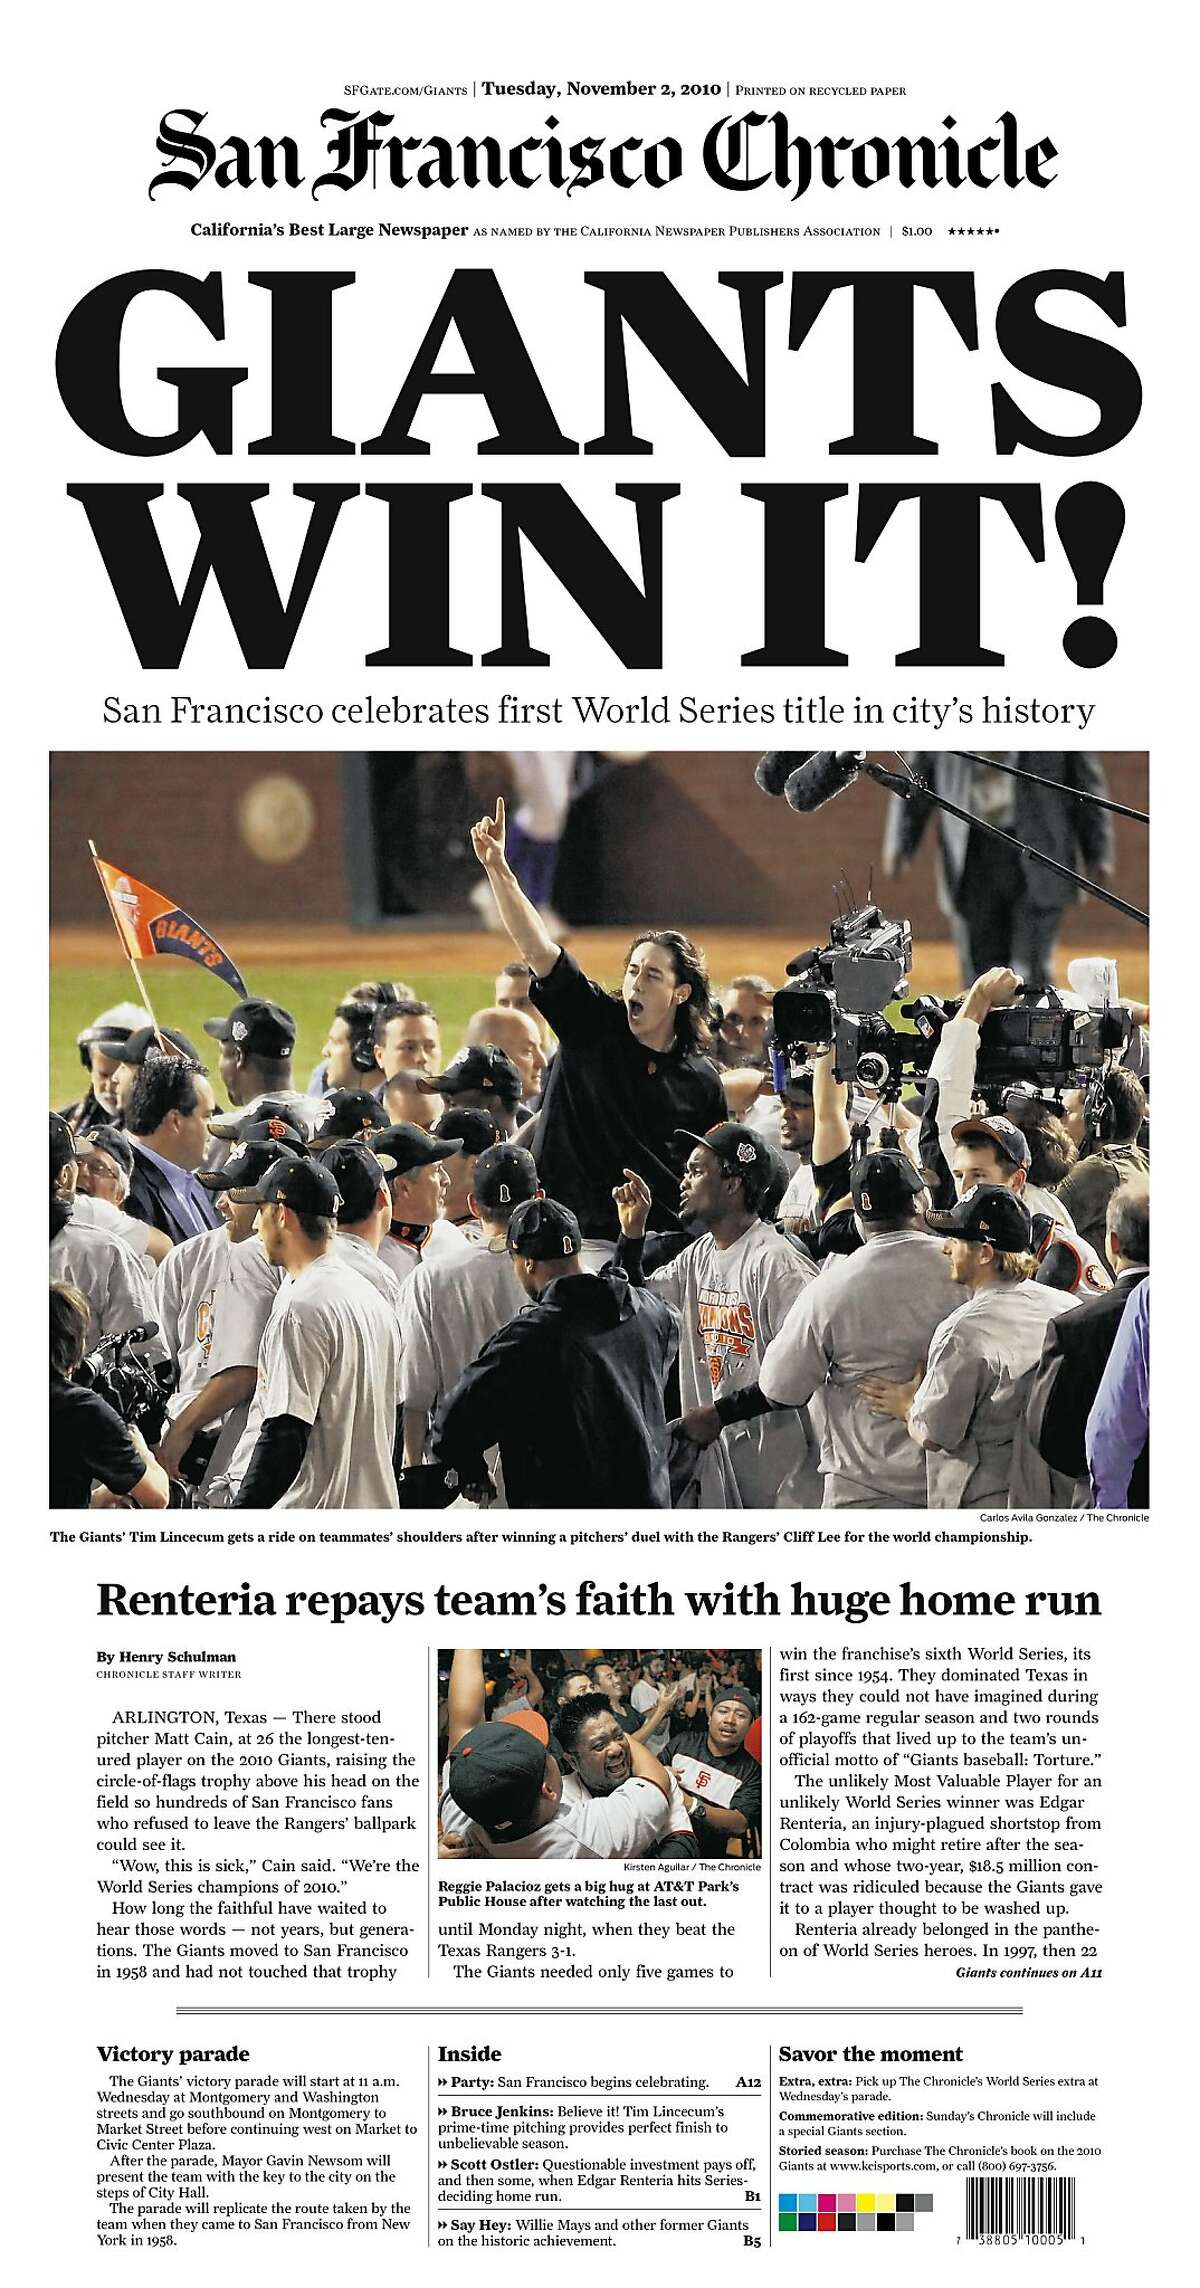 Historic Chronicle Front Page November 02, 2010 San Francisco Giants win the cities' first World Series Chron365, Chroncover